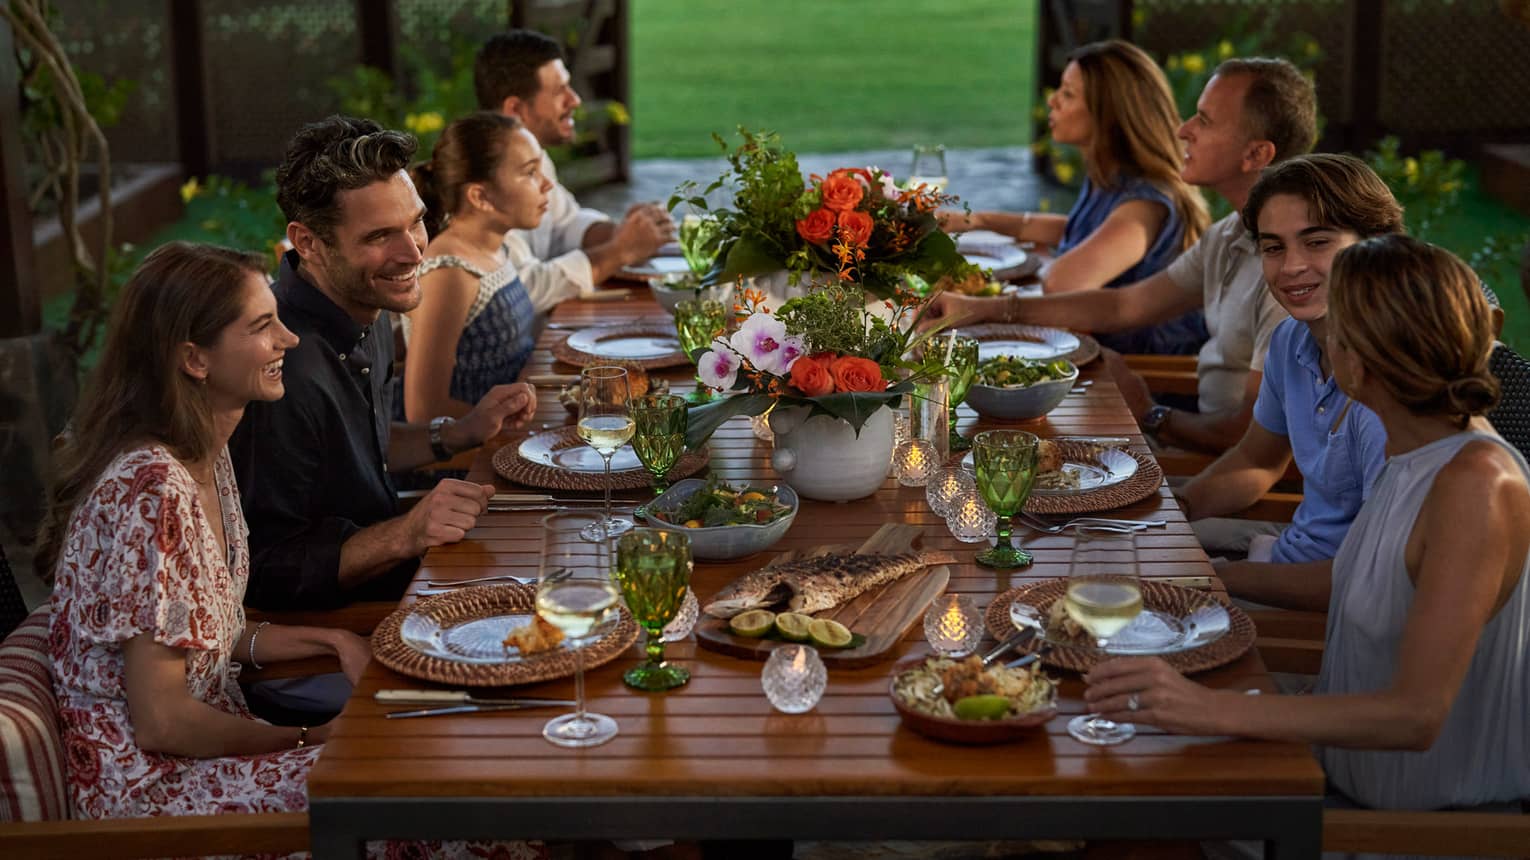 A large group sits at an outdoor dining table decorated with floral arrangements